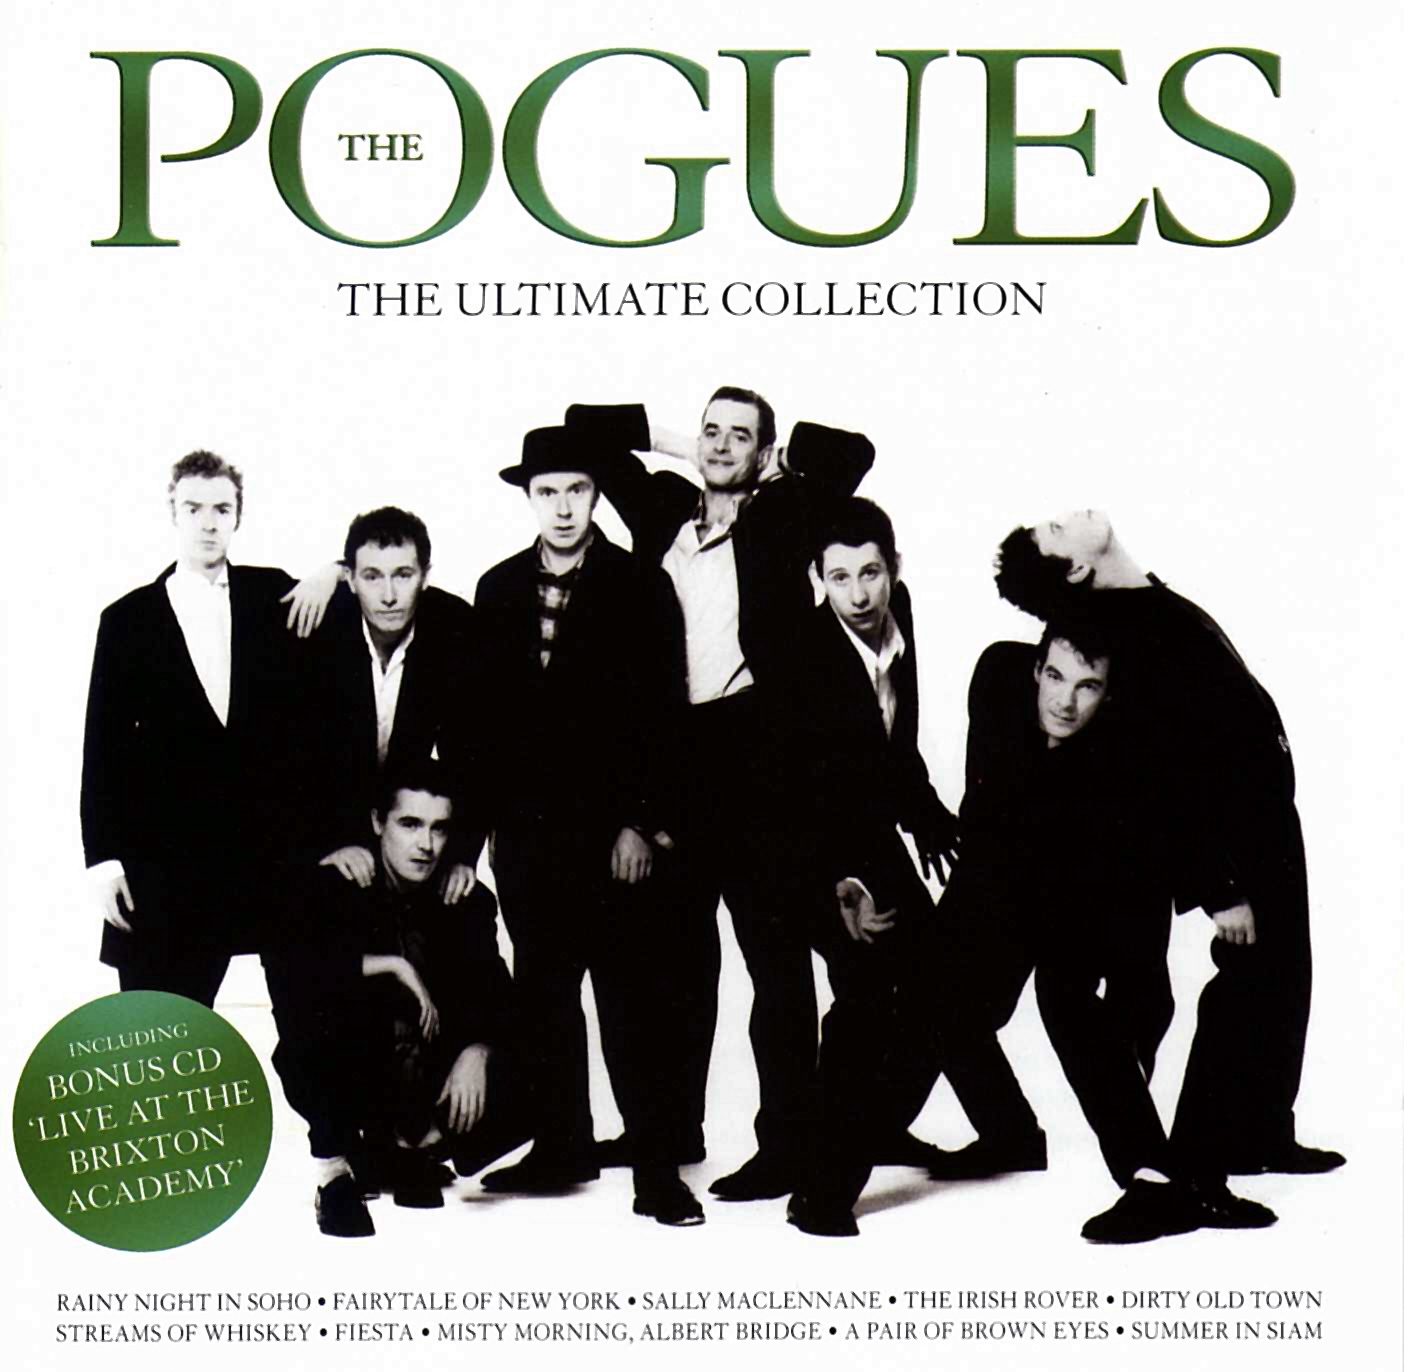 The Pogues - The Ultimate Collection (Reissue) (2CD)